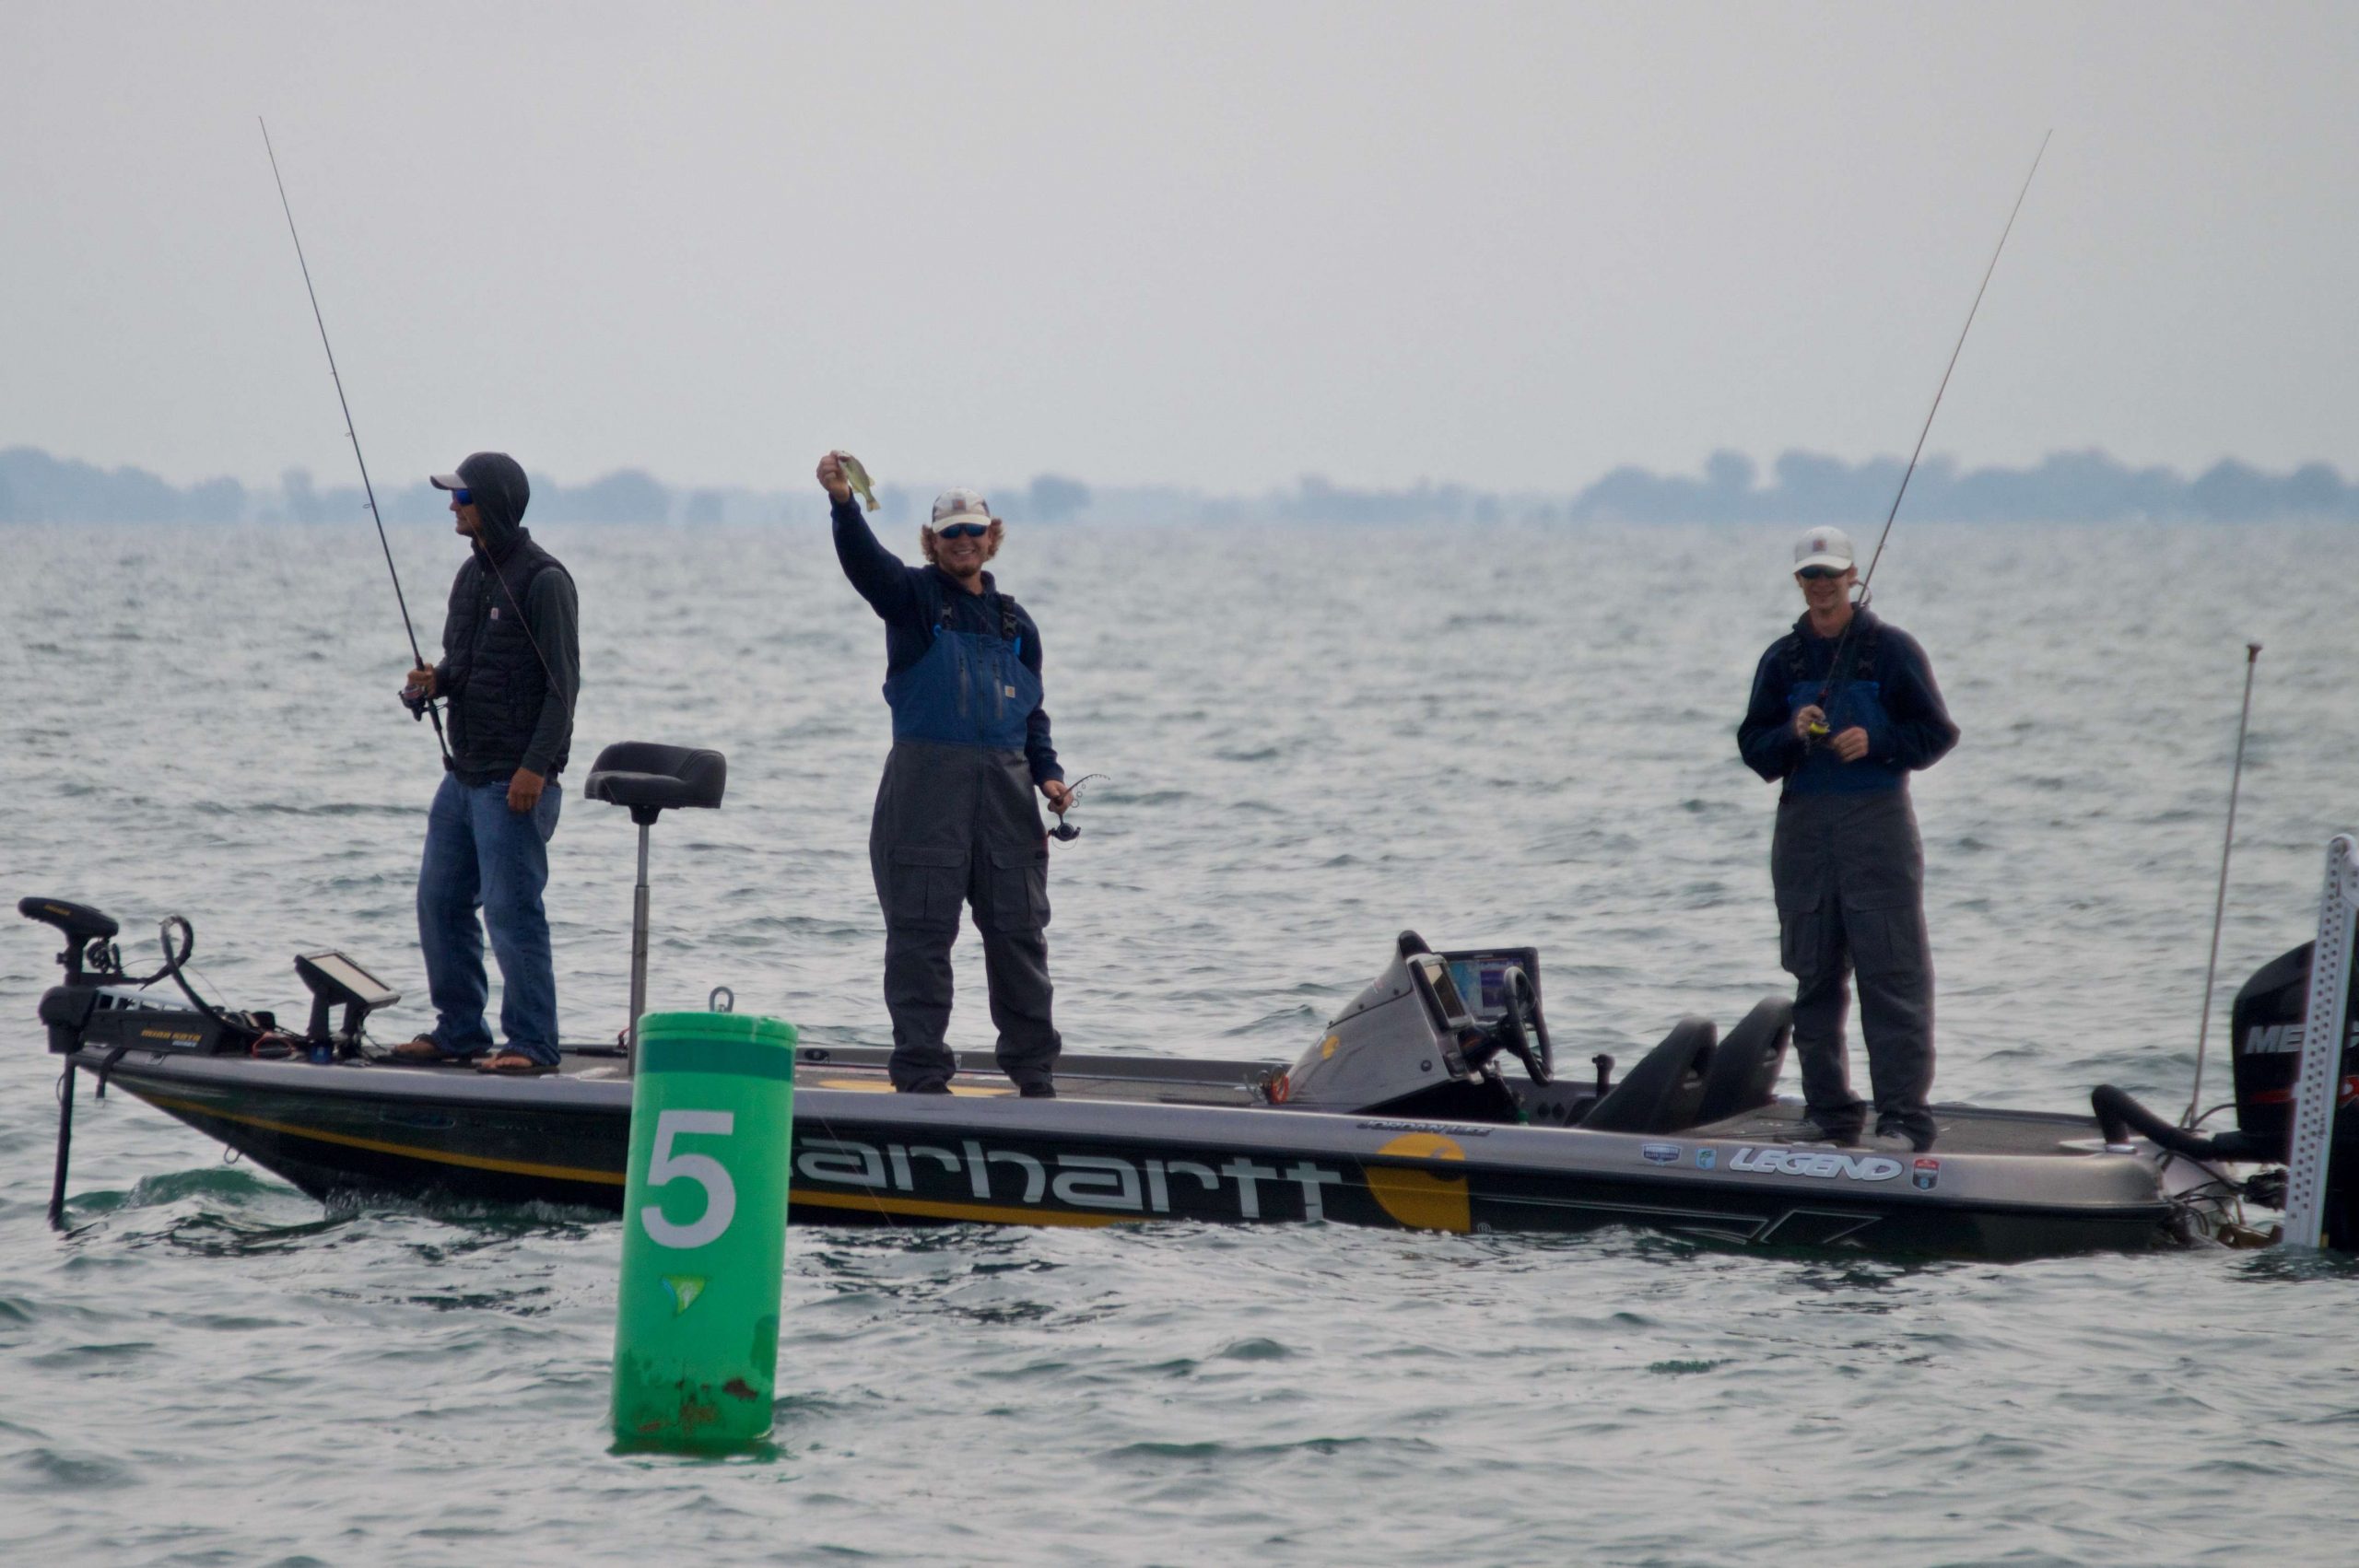 Finally the anglers jumped in Jordanâs boat and headed out on Lake St. Clair. Stopping first to pitch a drop shot on a few buoys. A small largemouth bass was the only takerâ¦
